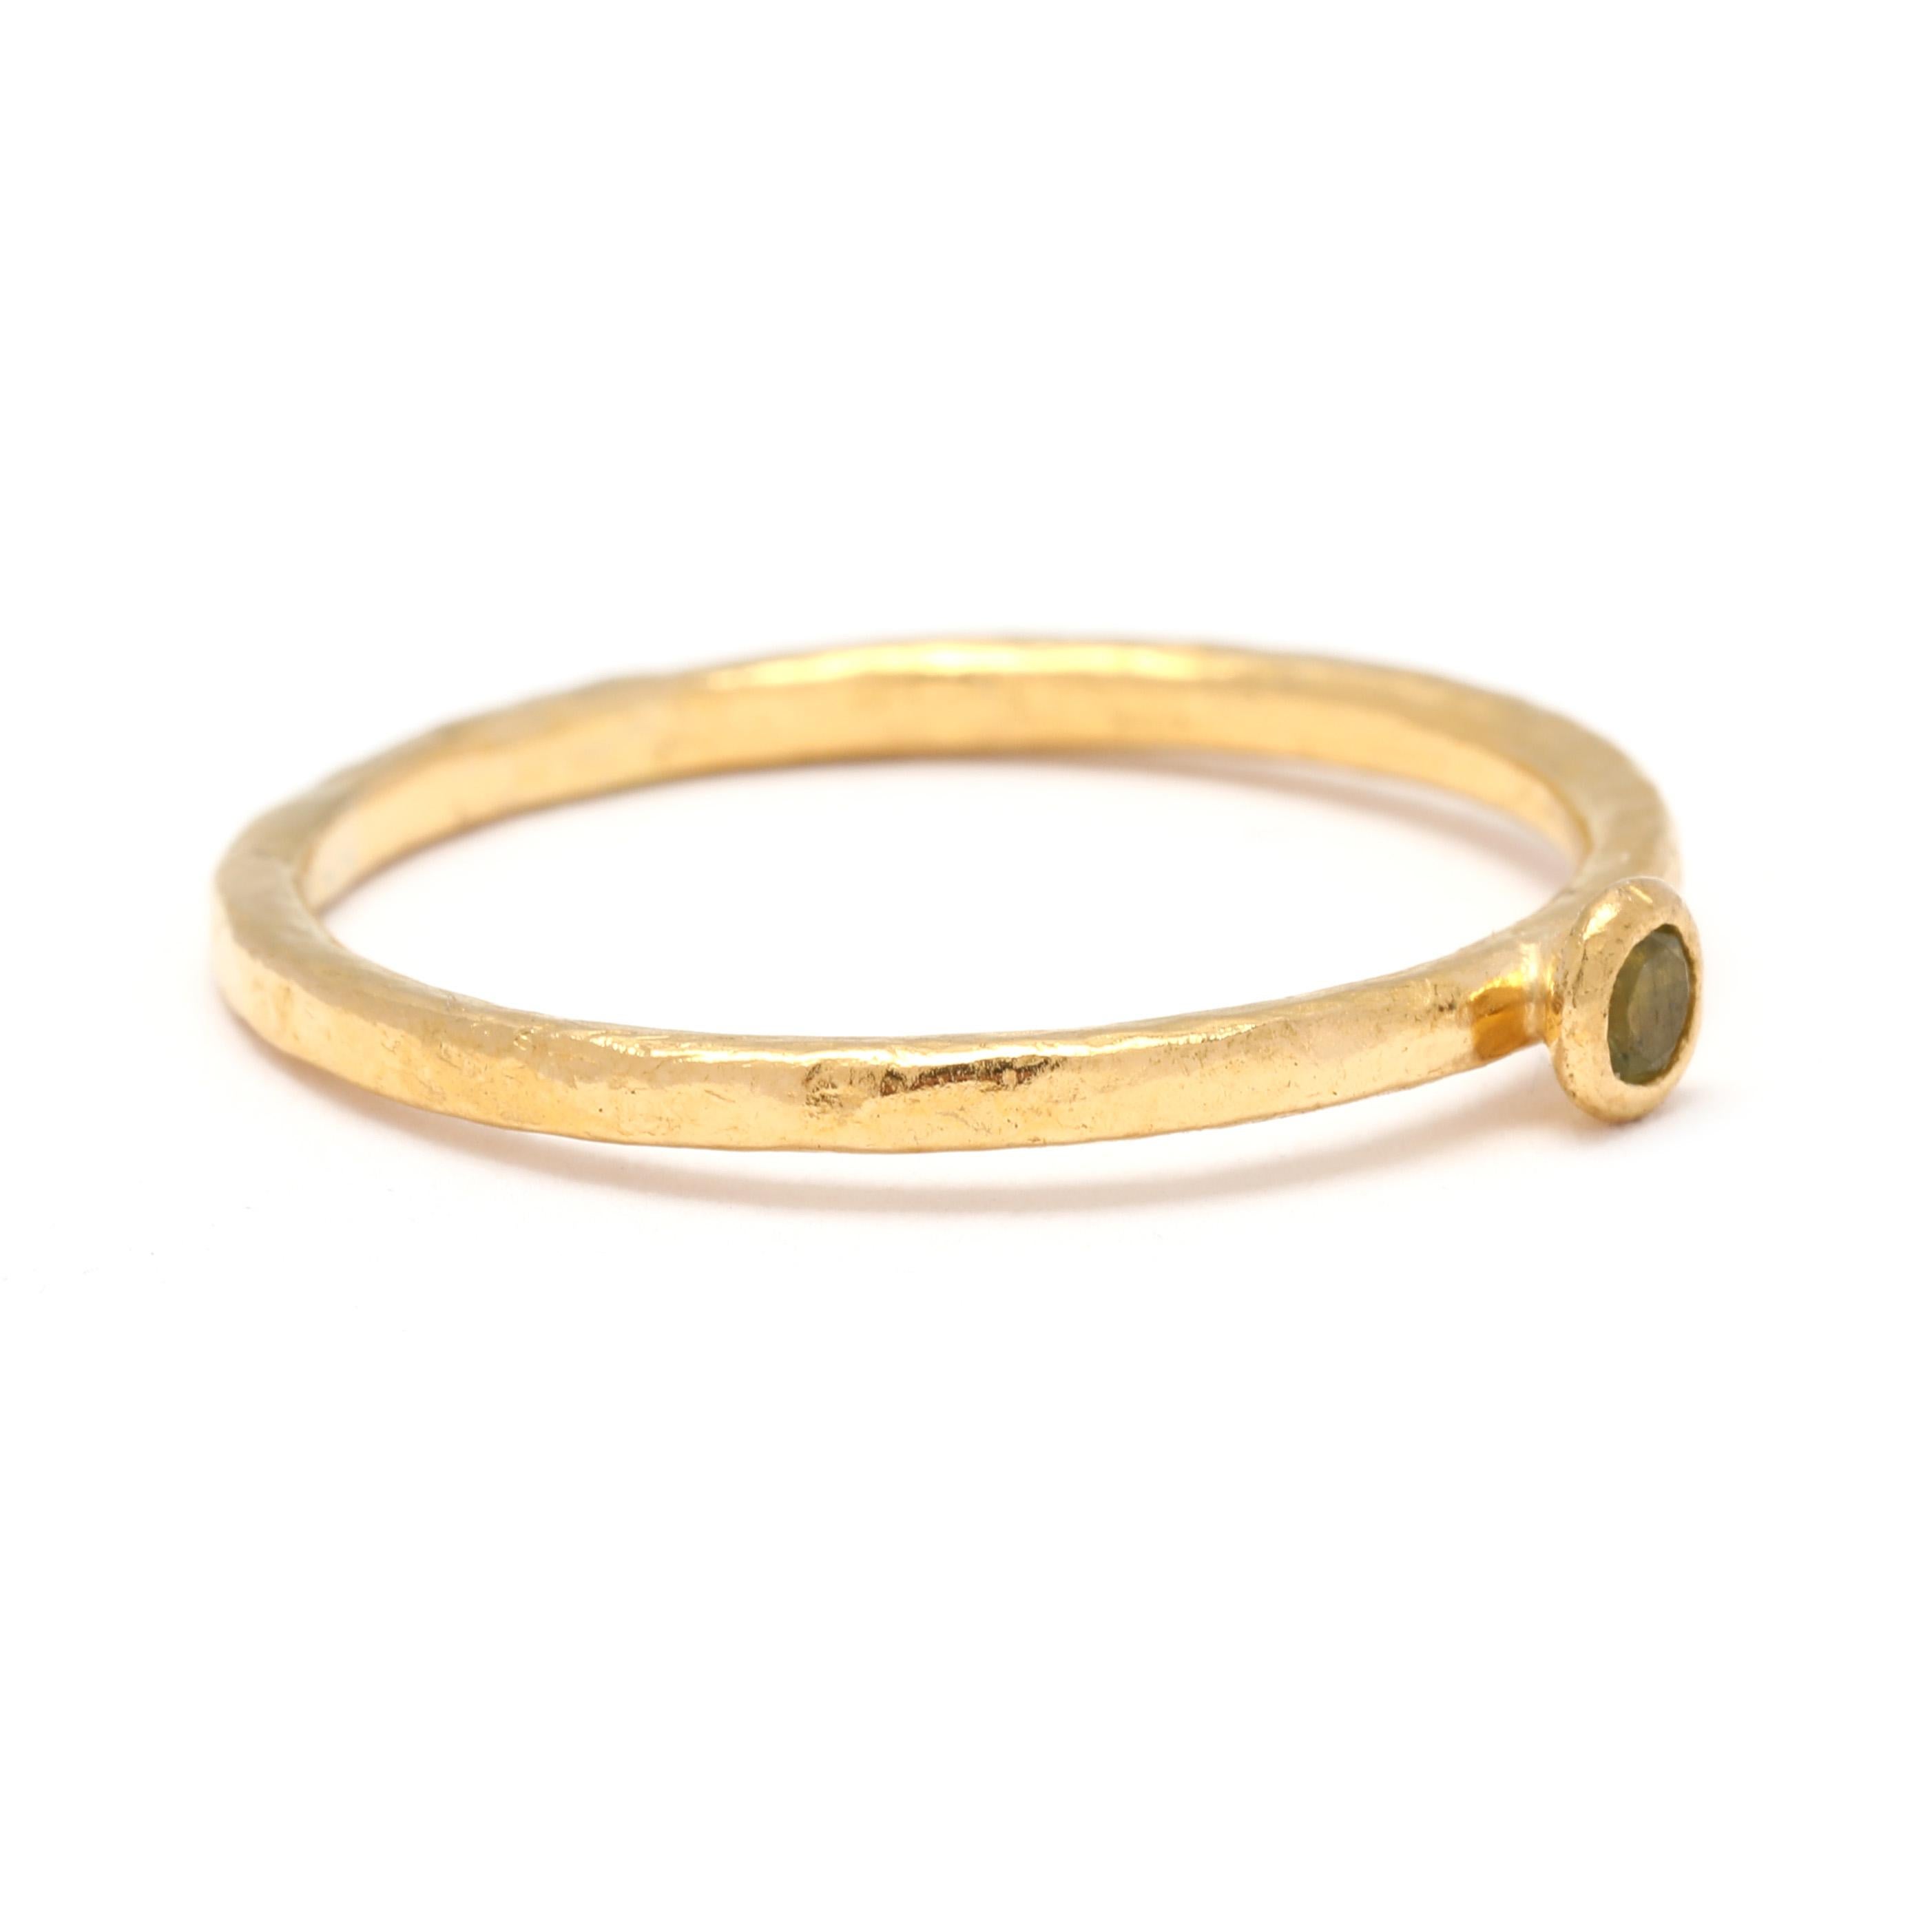 This dainty peridot ring is crafted in 24k yellow gold and features a beautiful round-cut peridot gemstone. The peridot gemstone is dainty and adds some uniqueness to the simple ring. The thin band adds a delicate and feminine touch to the design,